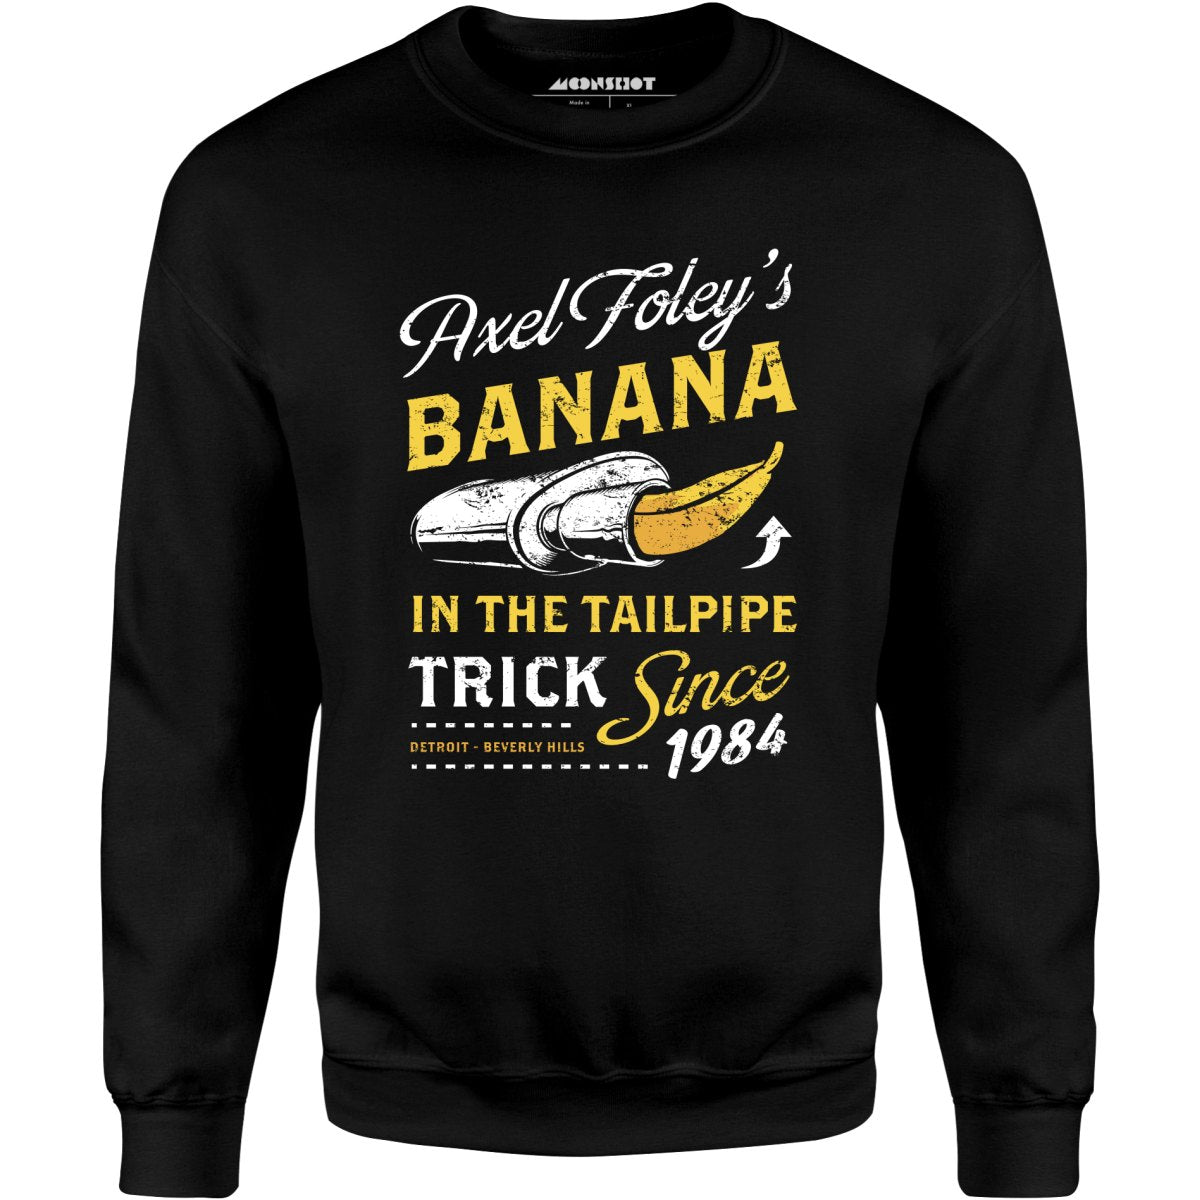 Axel Foley's Banana in the Tailpipe Trick - Unisex Sweatshirt